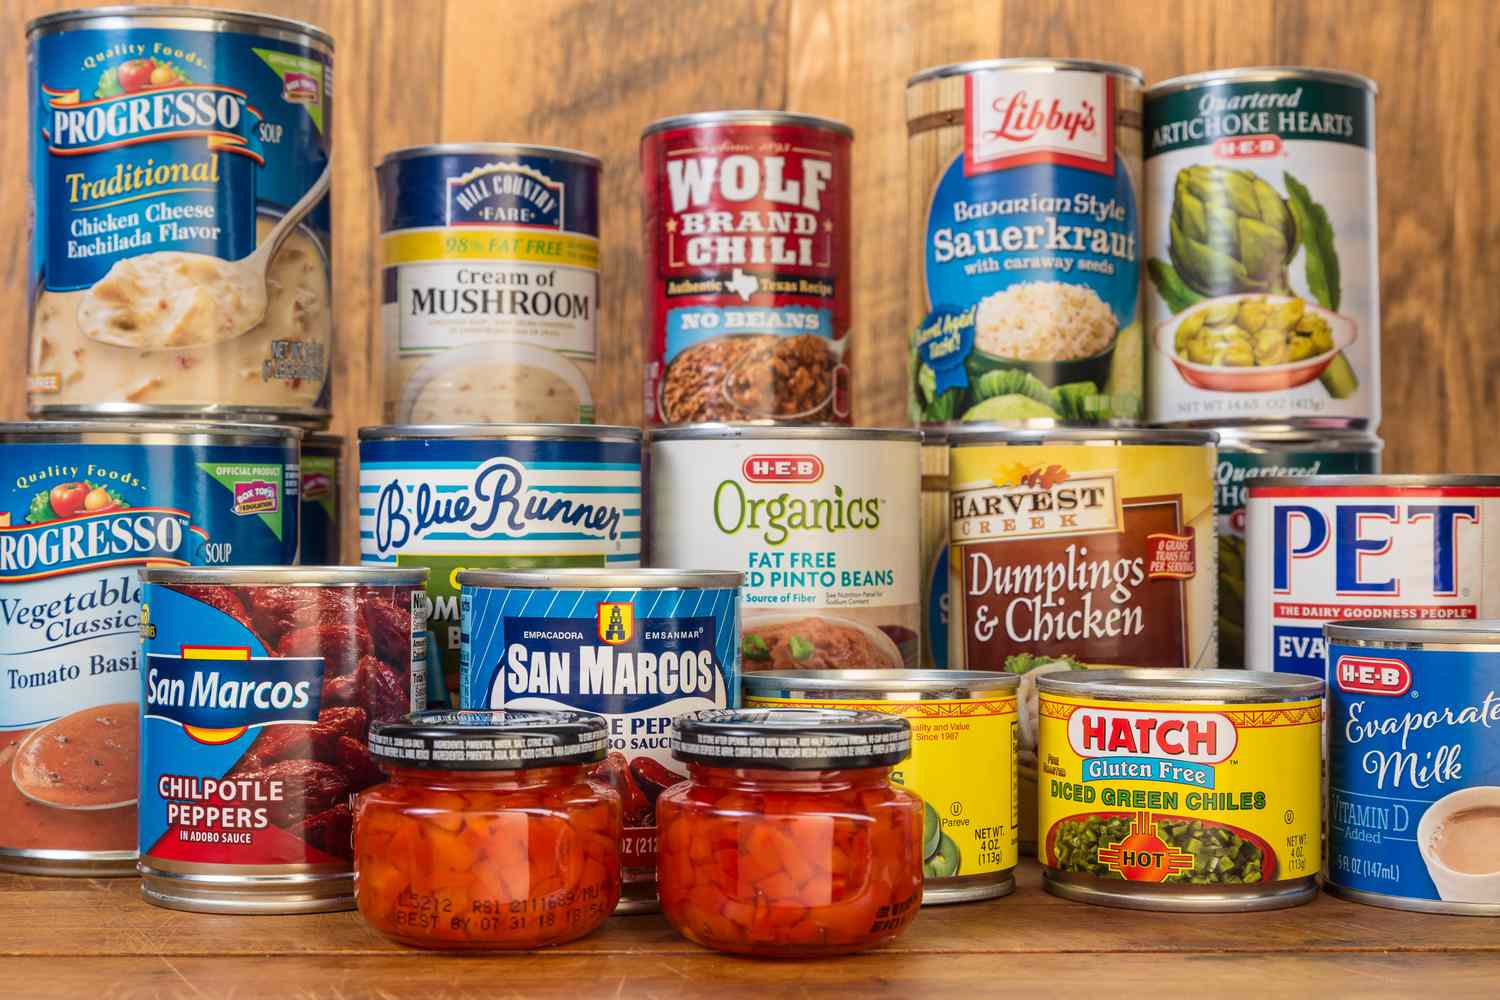 “Exploring the Sustainability of Canned Food Packaging”